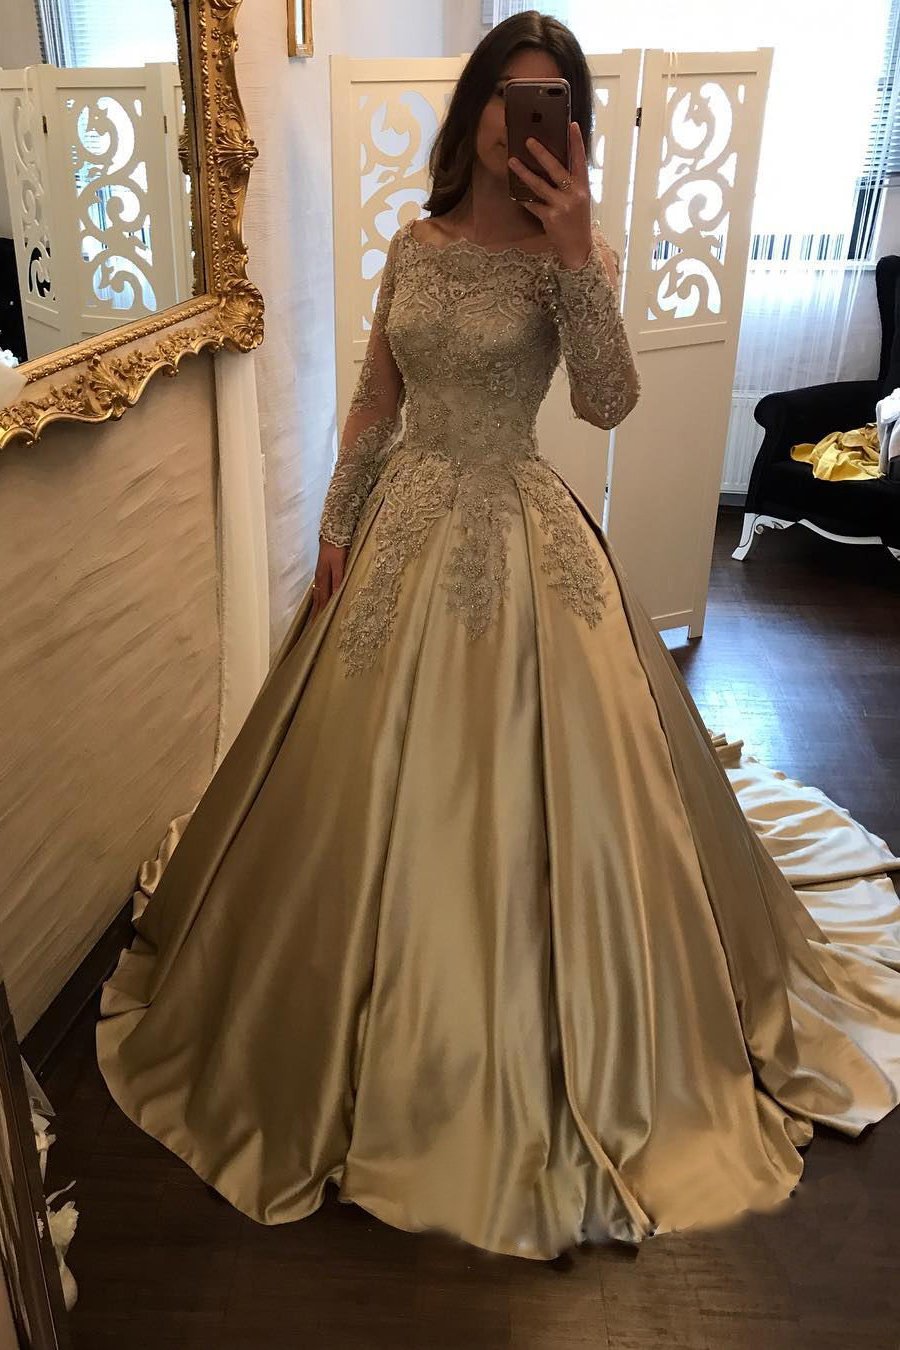 Satin Ball Gown Gold Long Sleeves Scoop Lace Appliques Beads Floor Length Prom Dresses WK771